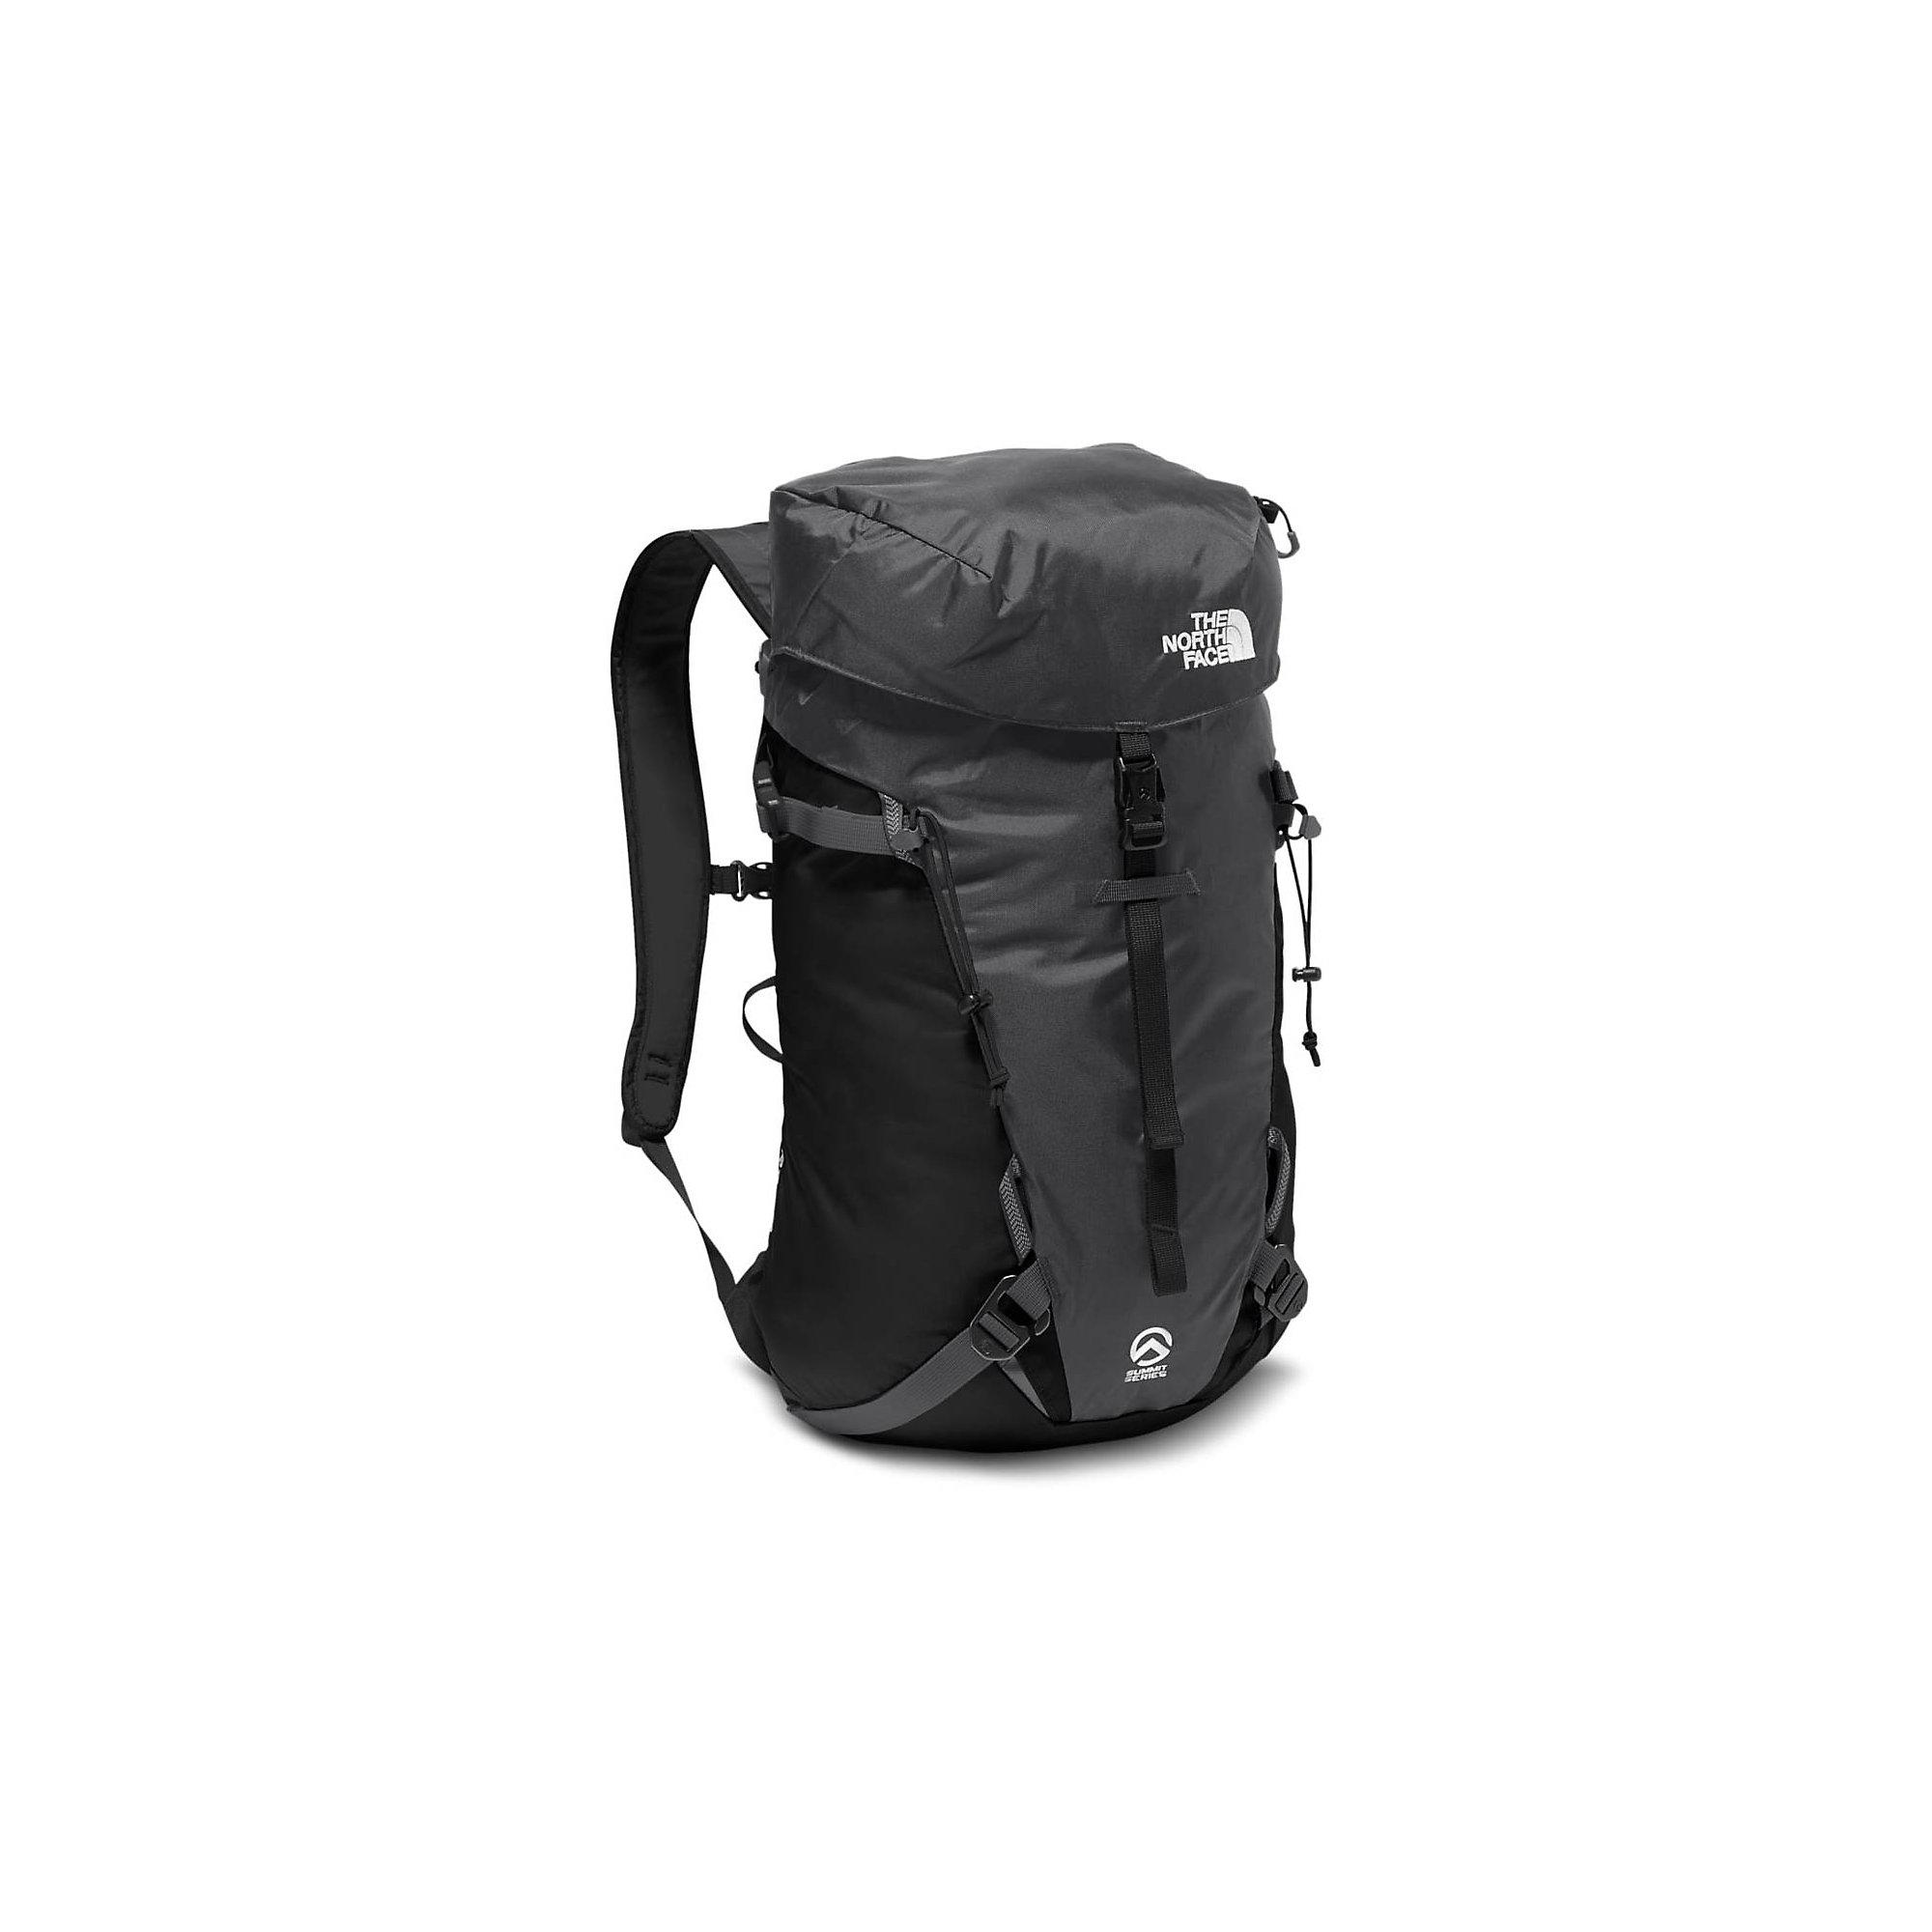 The North Face Synthetic Verto 18 Pack 